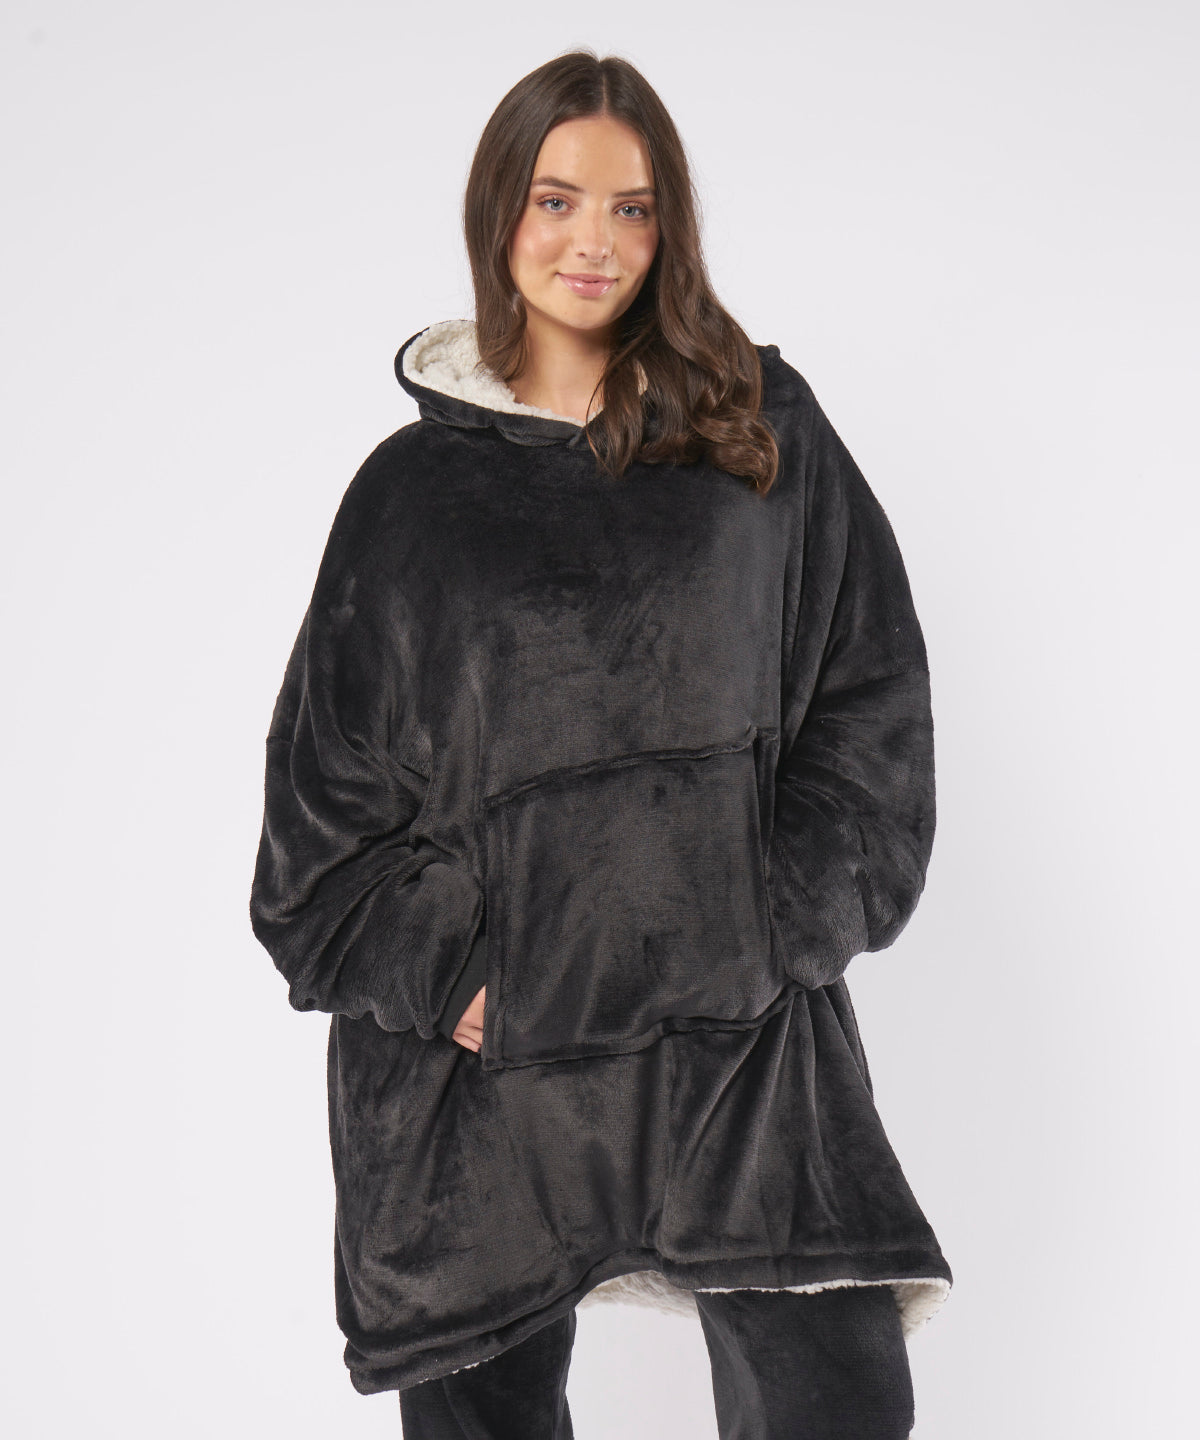 The Ribbon oversized cosy reversible sherpa hoodie - COOZO